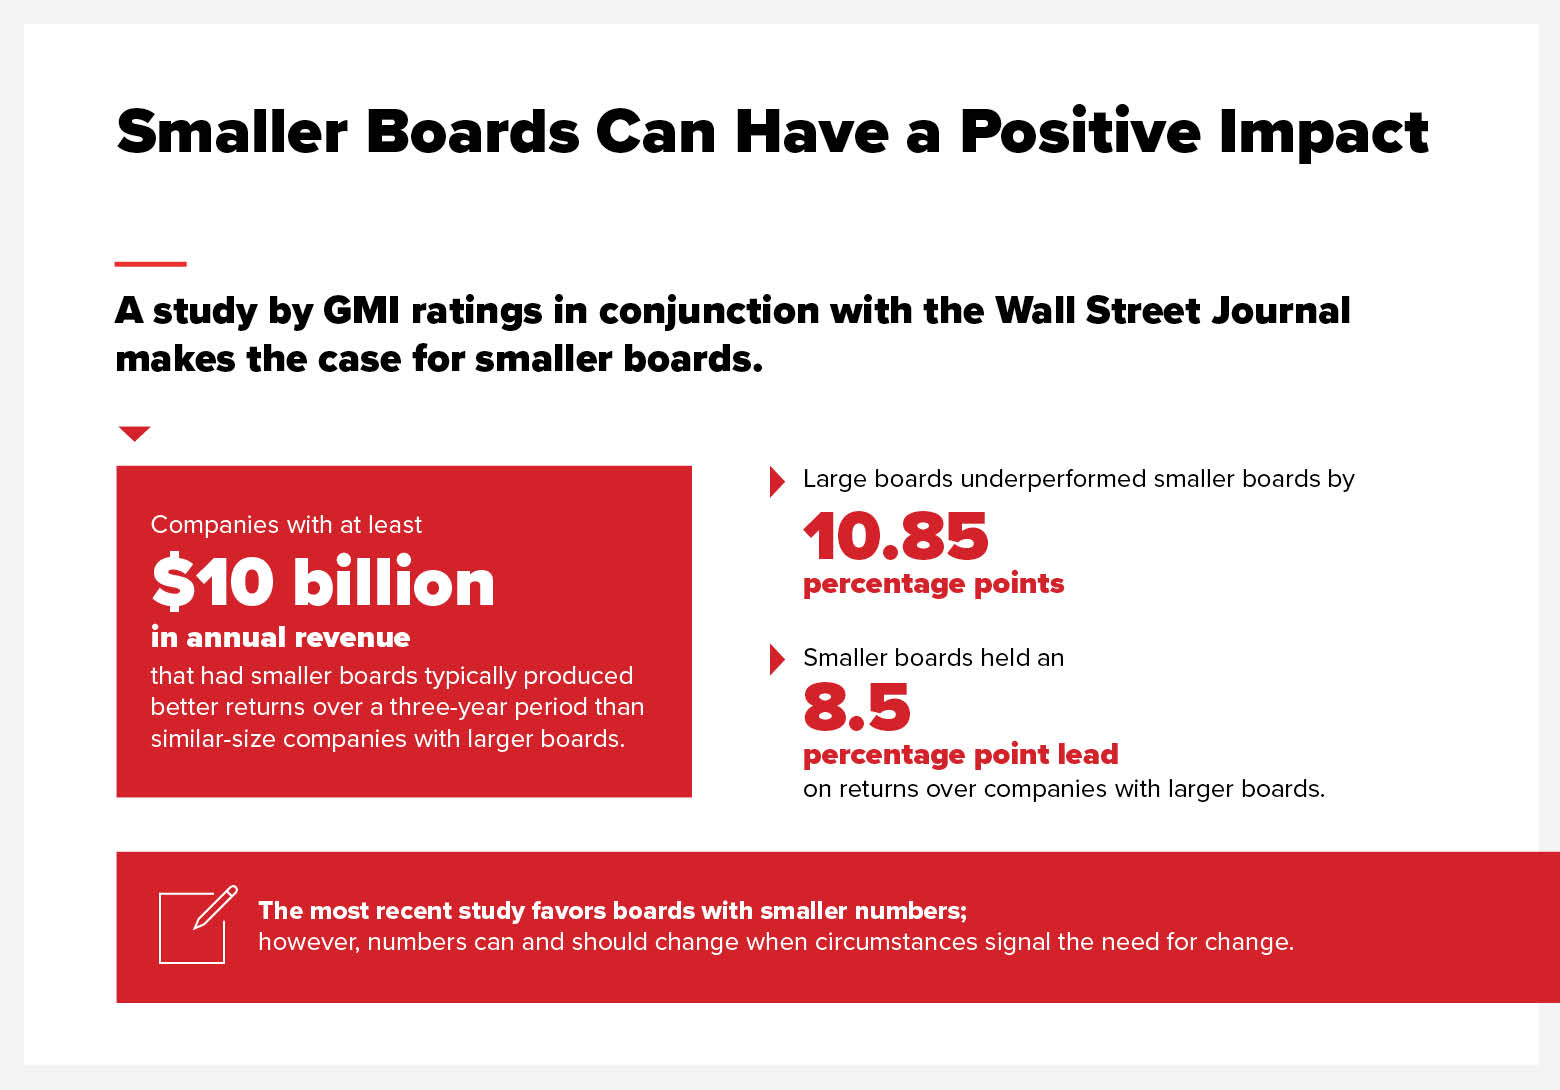 Smaller boards can have a positive impact for your organization. Companies with smaller boards produce better returns over a three-year period than those with larger boards.